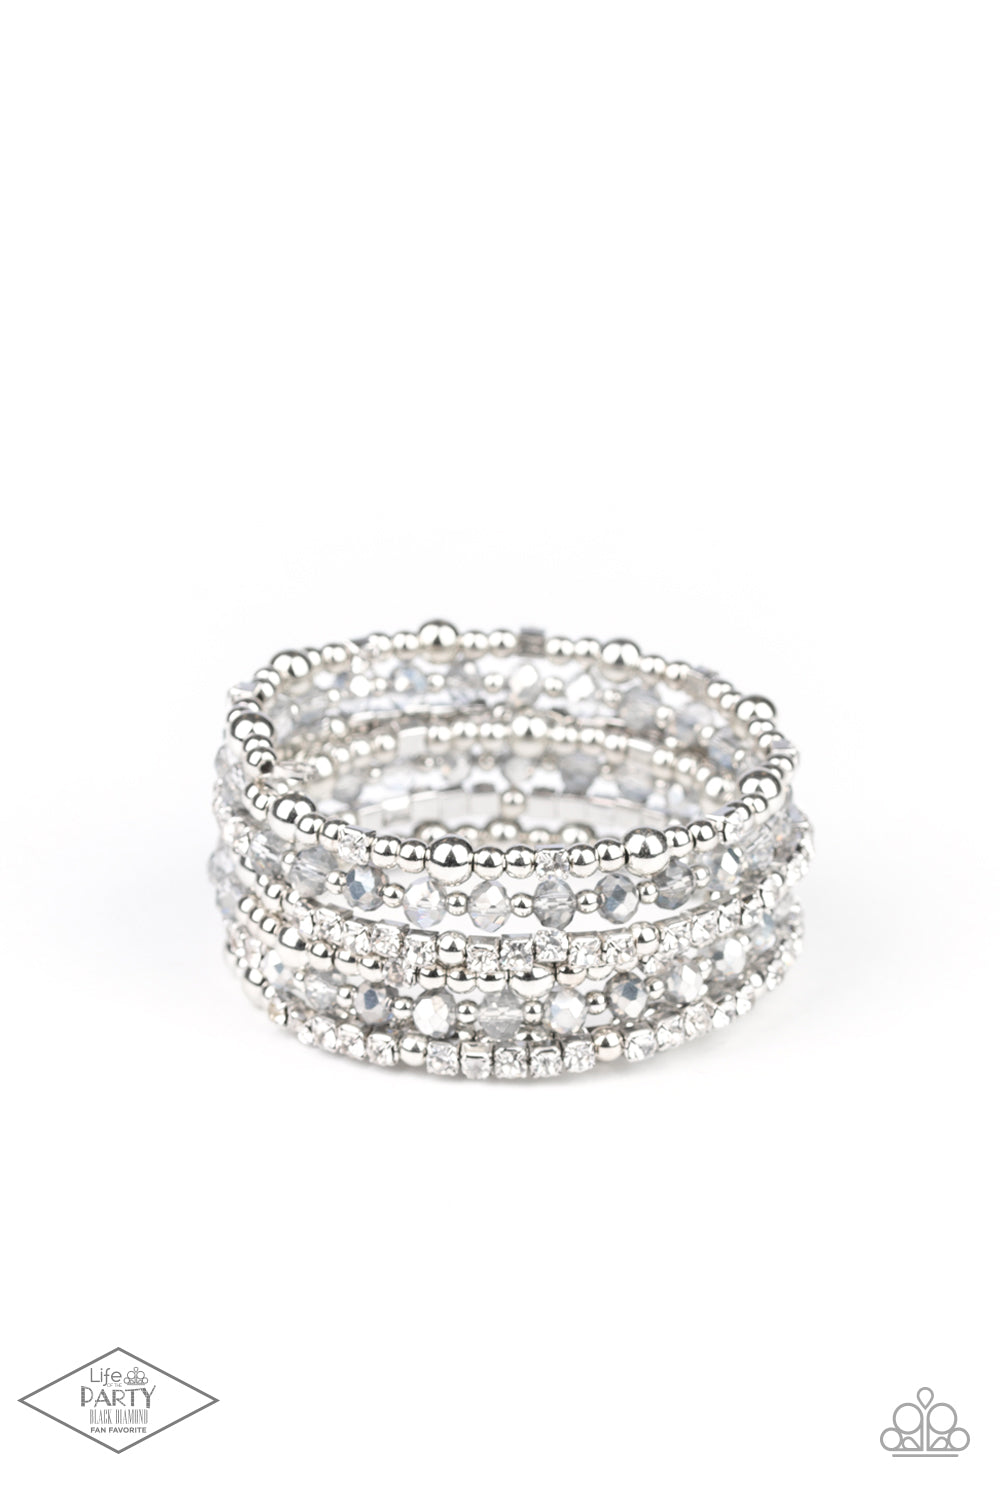 ICE Knowing You Silver Bracelet - Paparazzi Accessories  An icy collection of silver beads, silver cubes, metallic crystals, and glassy white rhinestones are threaded along a coiled wire, creating a blinding infinity wrap style bracelet around the wrist.  All Paparazzi Accessories are lead free and nickel free!  Sold as one individual bracelet.